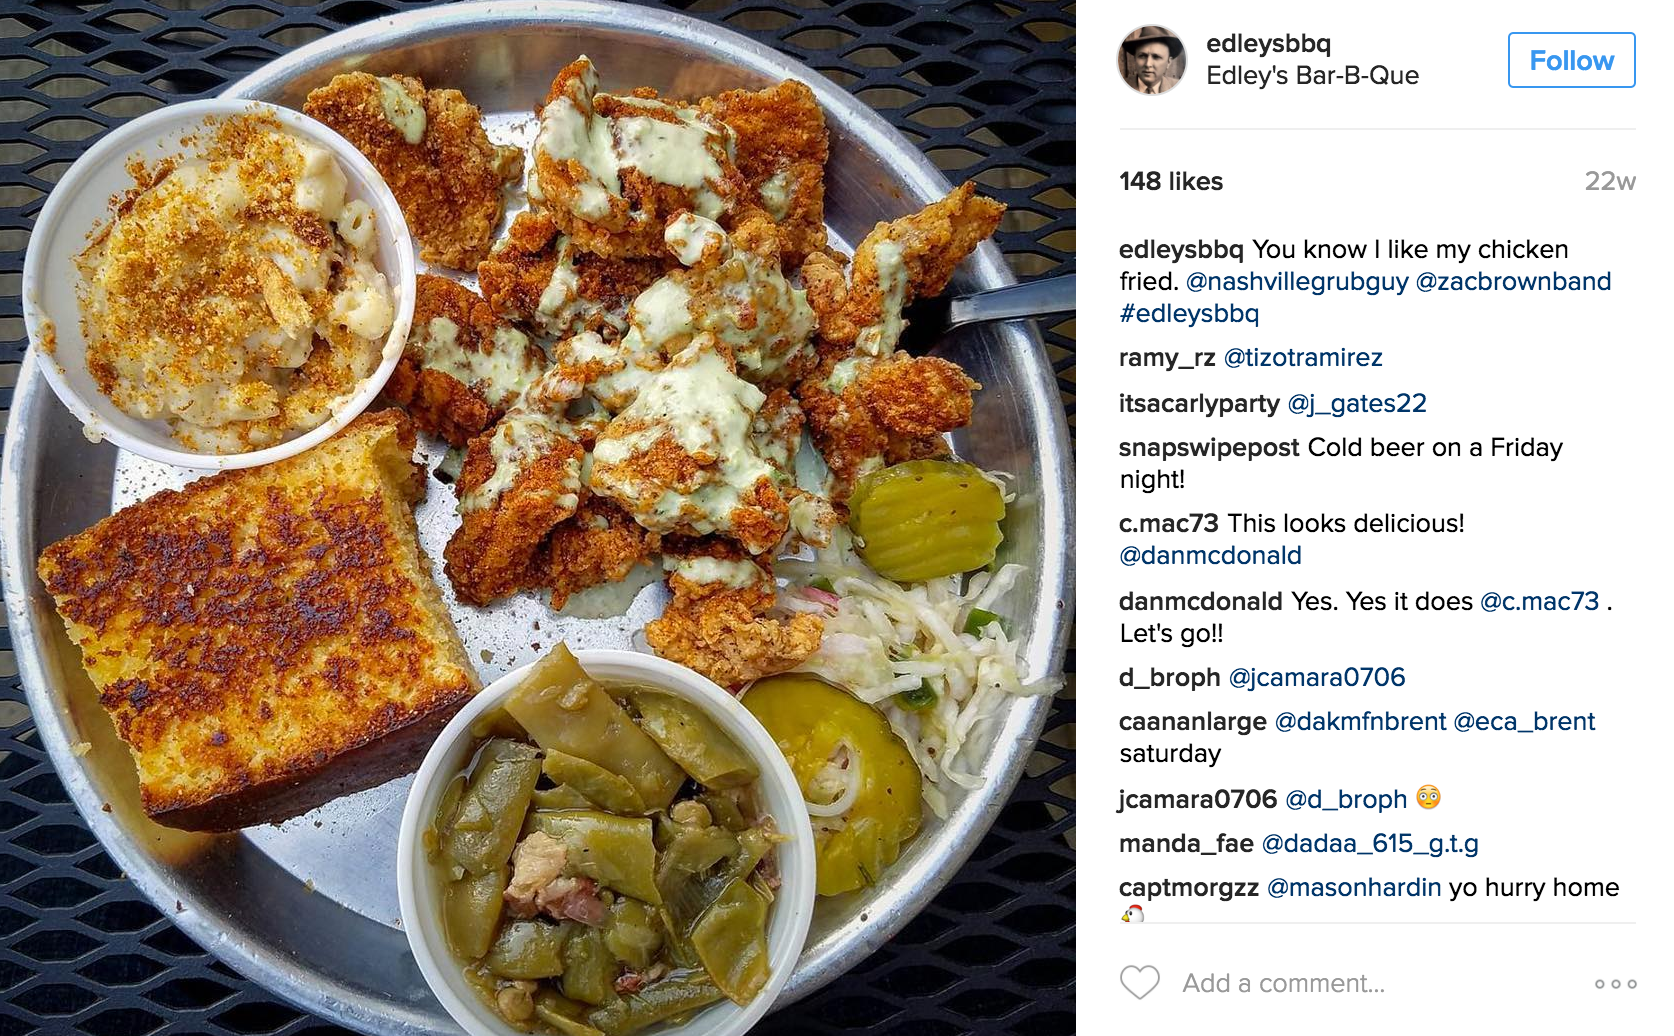 An example of an Edley's Bar-B-Que Instagram post, uploaded by Parachute Media.